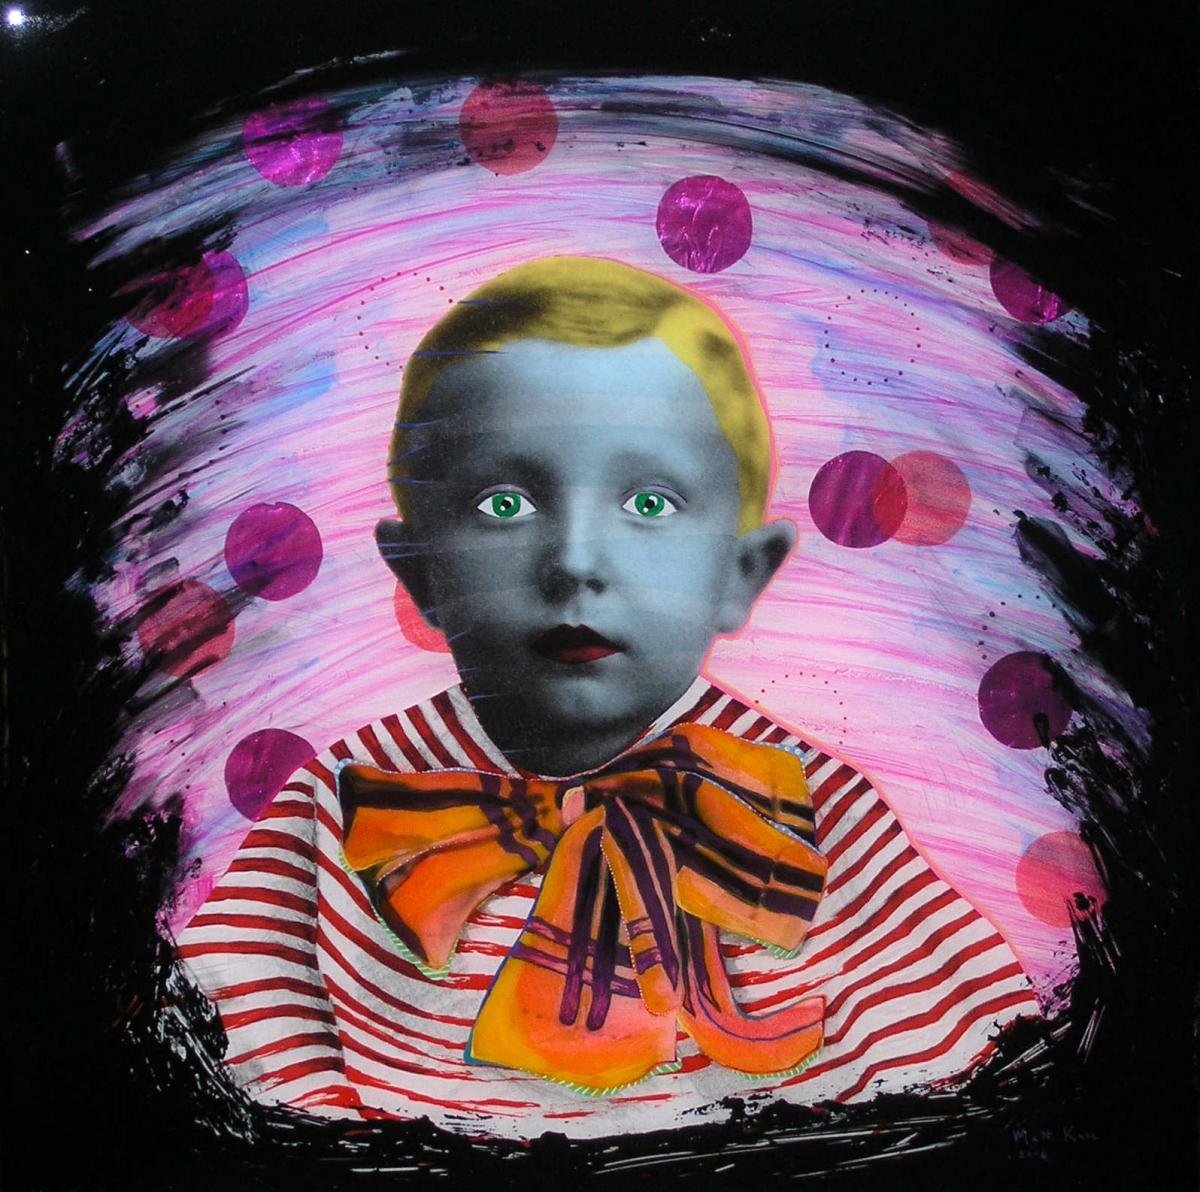 resin painting by Matt Kane - “Dress me in your father’s sailor clothes, I’ll still become my own.”